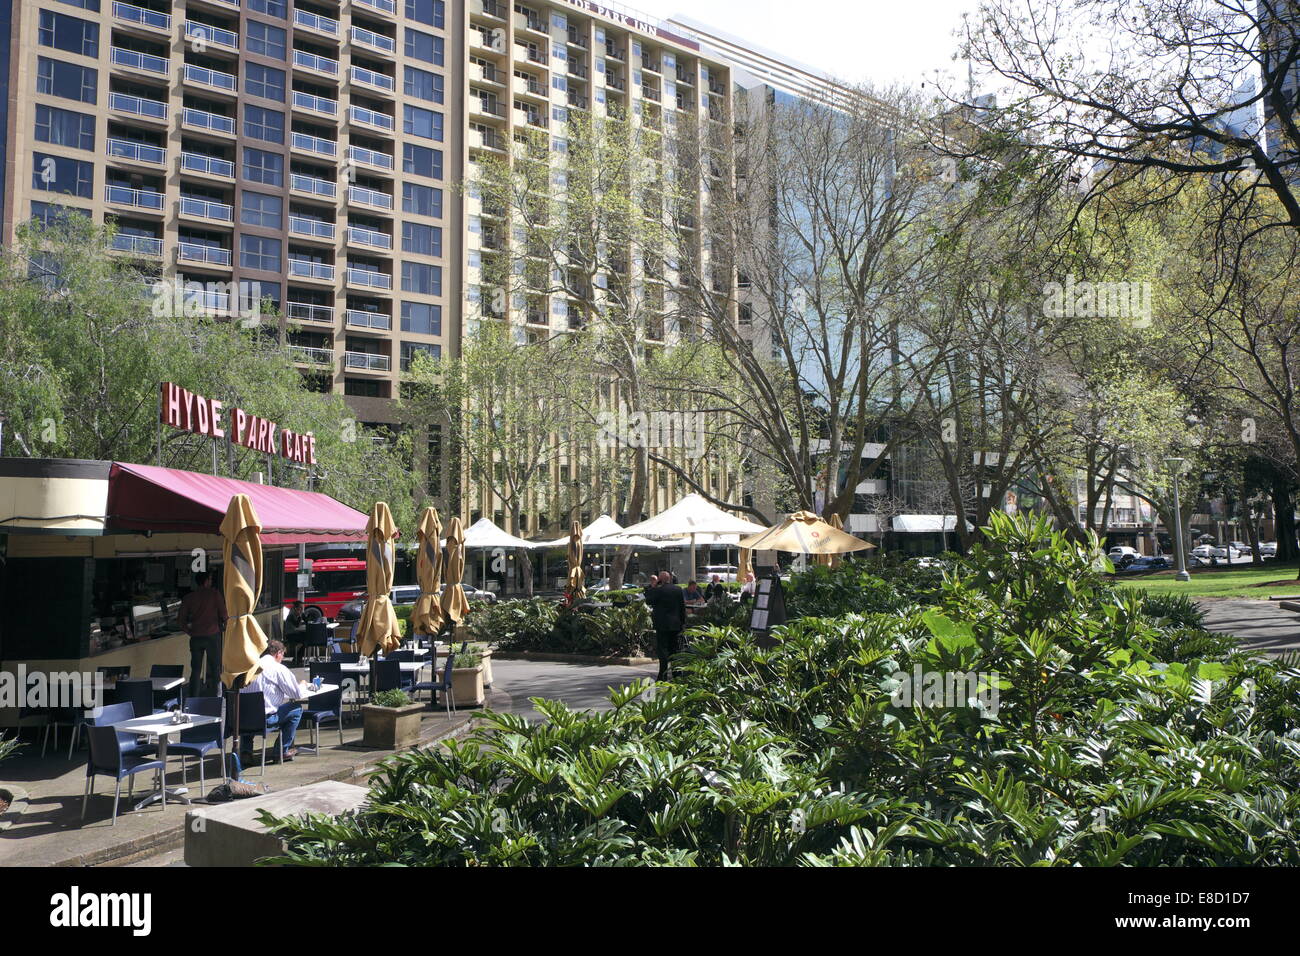 hyde park and hyde park cafe in the centre of sydney looking across to elizabeth street,sydney,australia Stock Photo